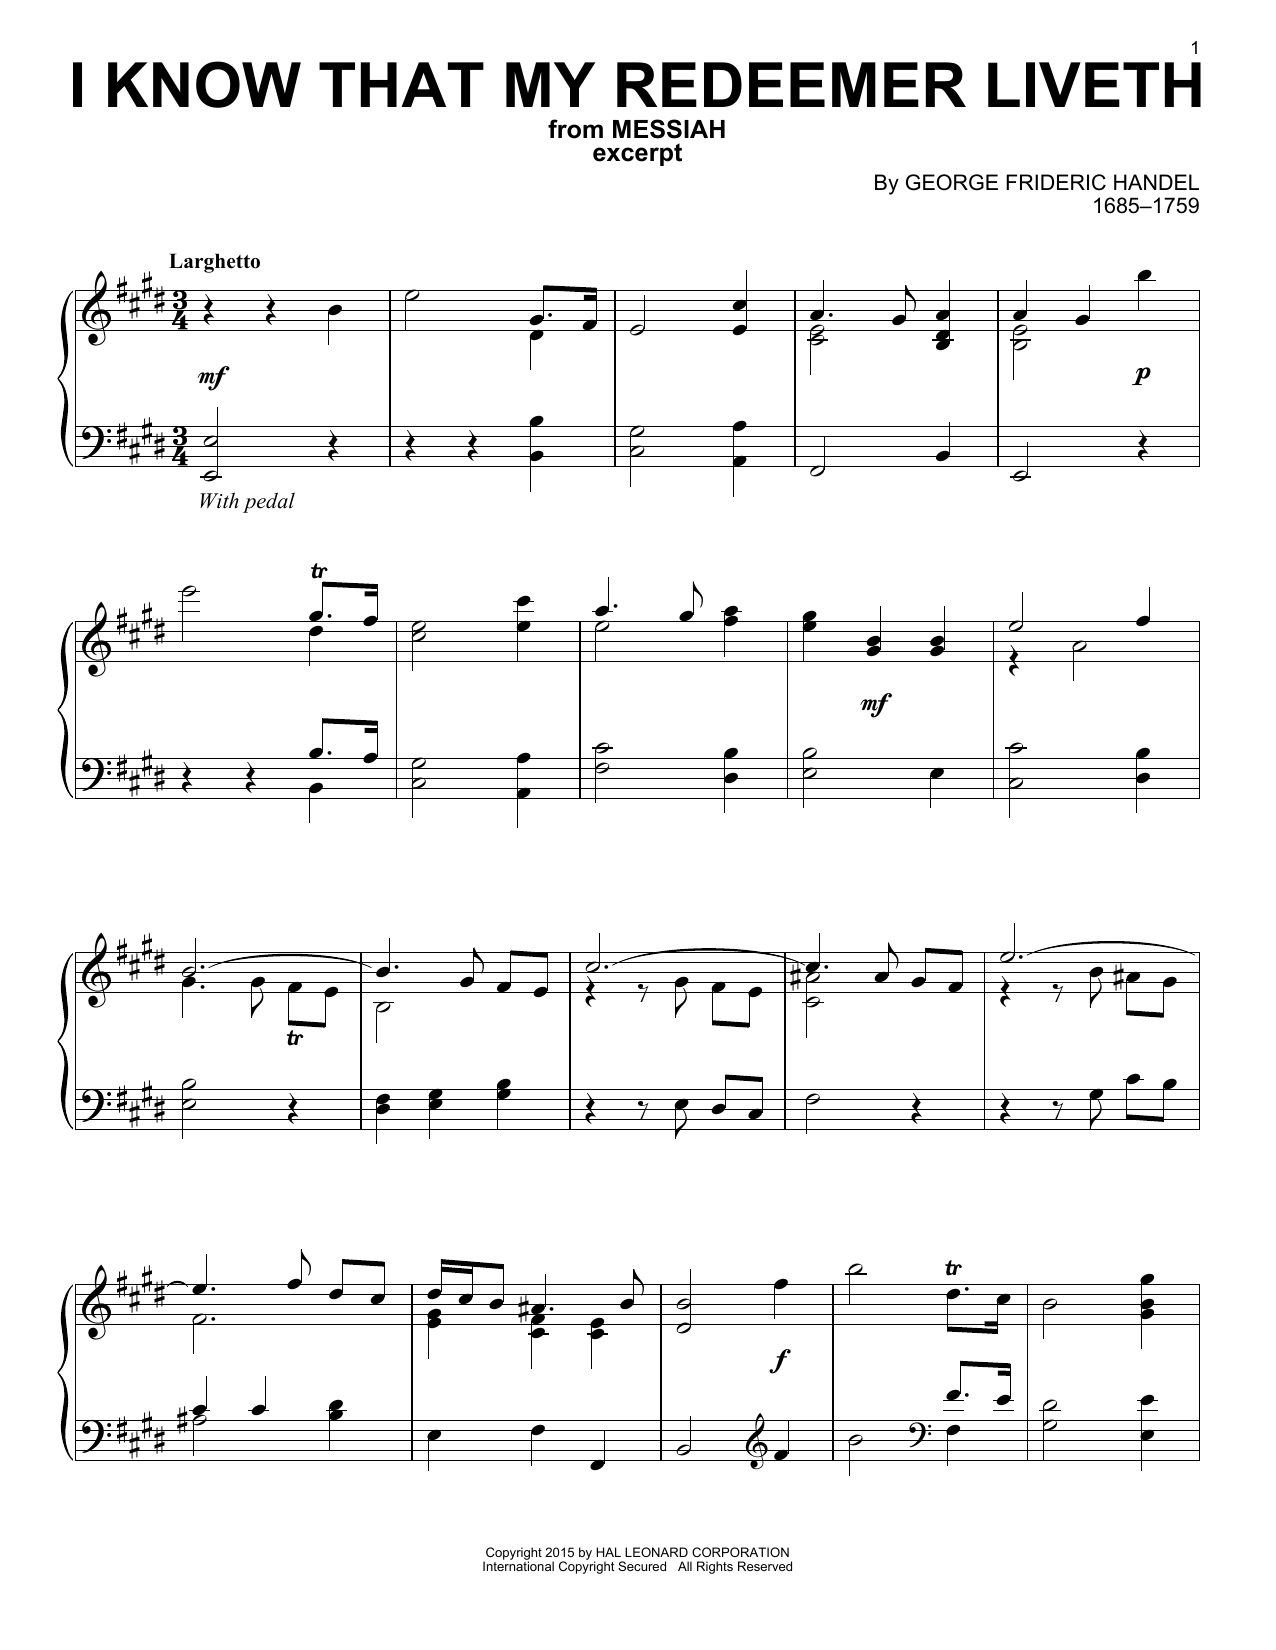 George Frideric Handel I Know That My Redeemer Liveth (from Messiah) sheet music notes and chords. Download Printable PDF.